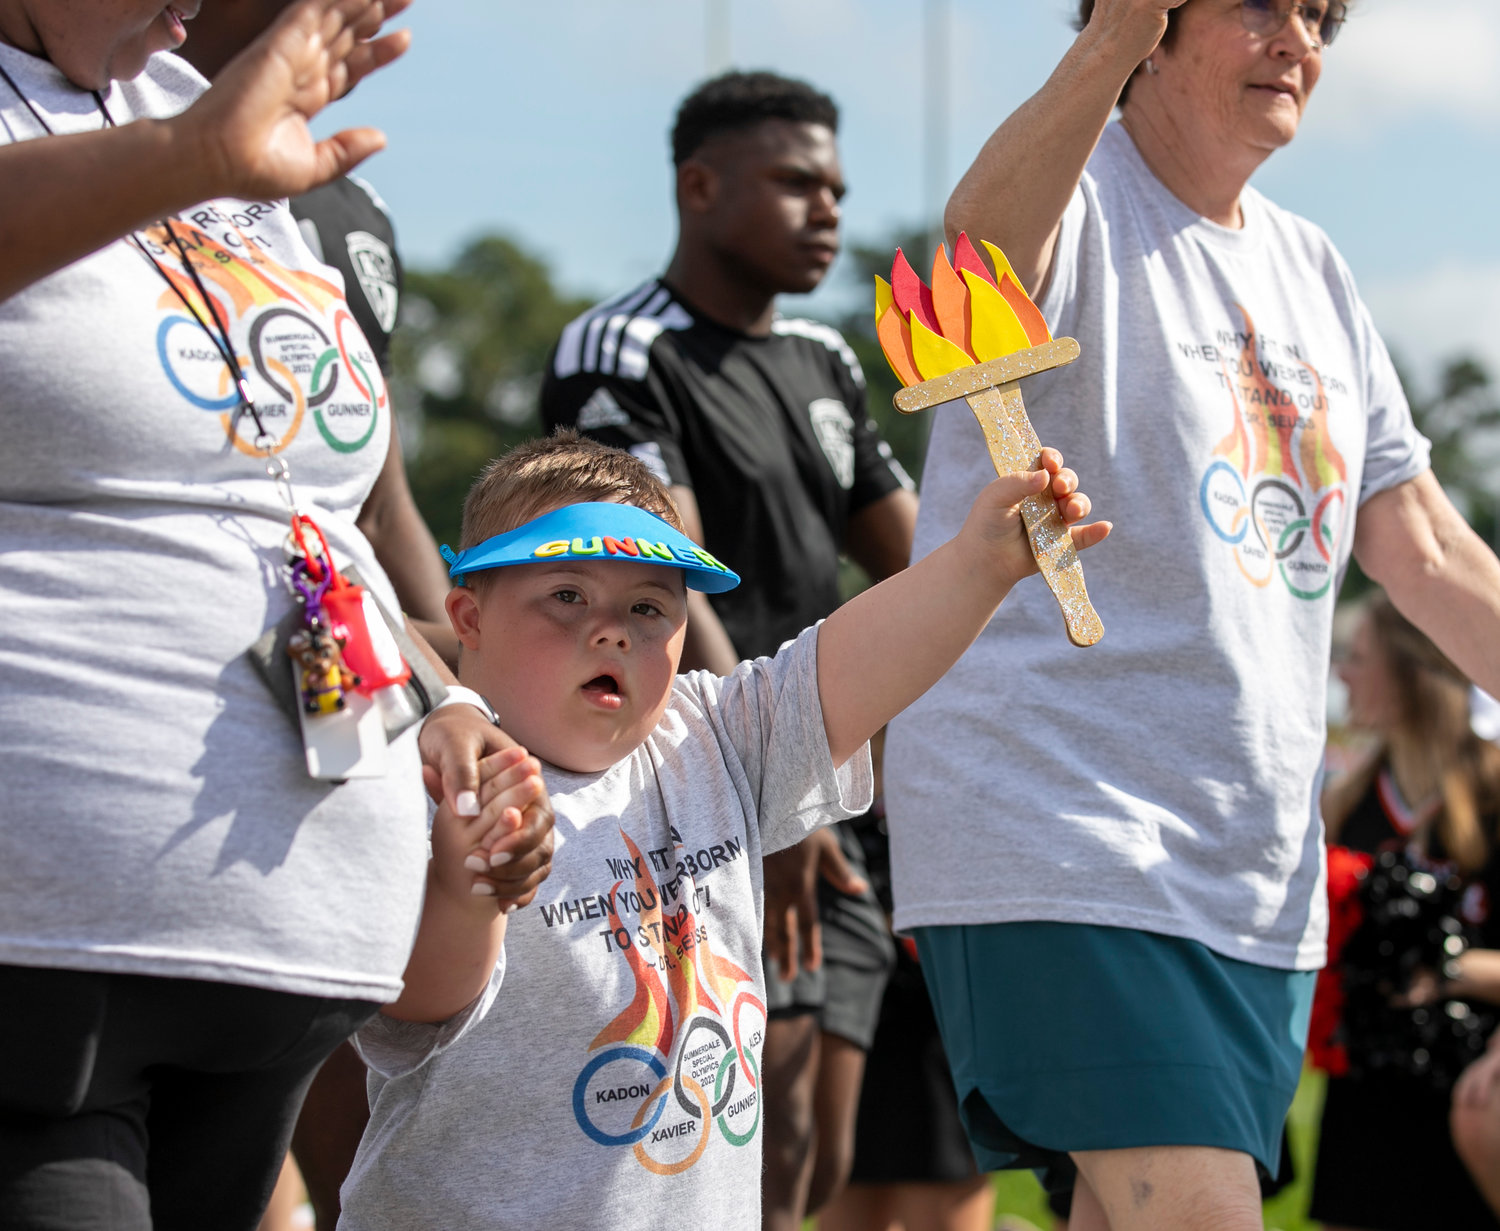 Fairhope Municipal Stadium hosted the Baldwin County Spring Games Thursday, April 6, where athletes ran, jumped and threw their way to the podium representing their school. Each school participated in the parade of athletes as part of the opening ceremonies.